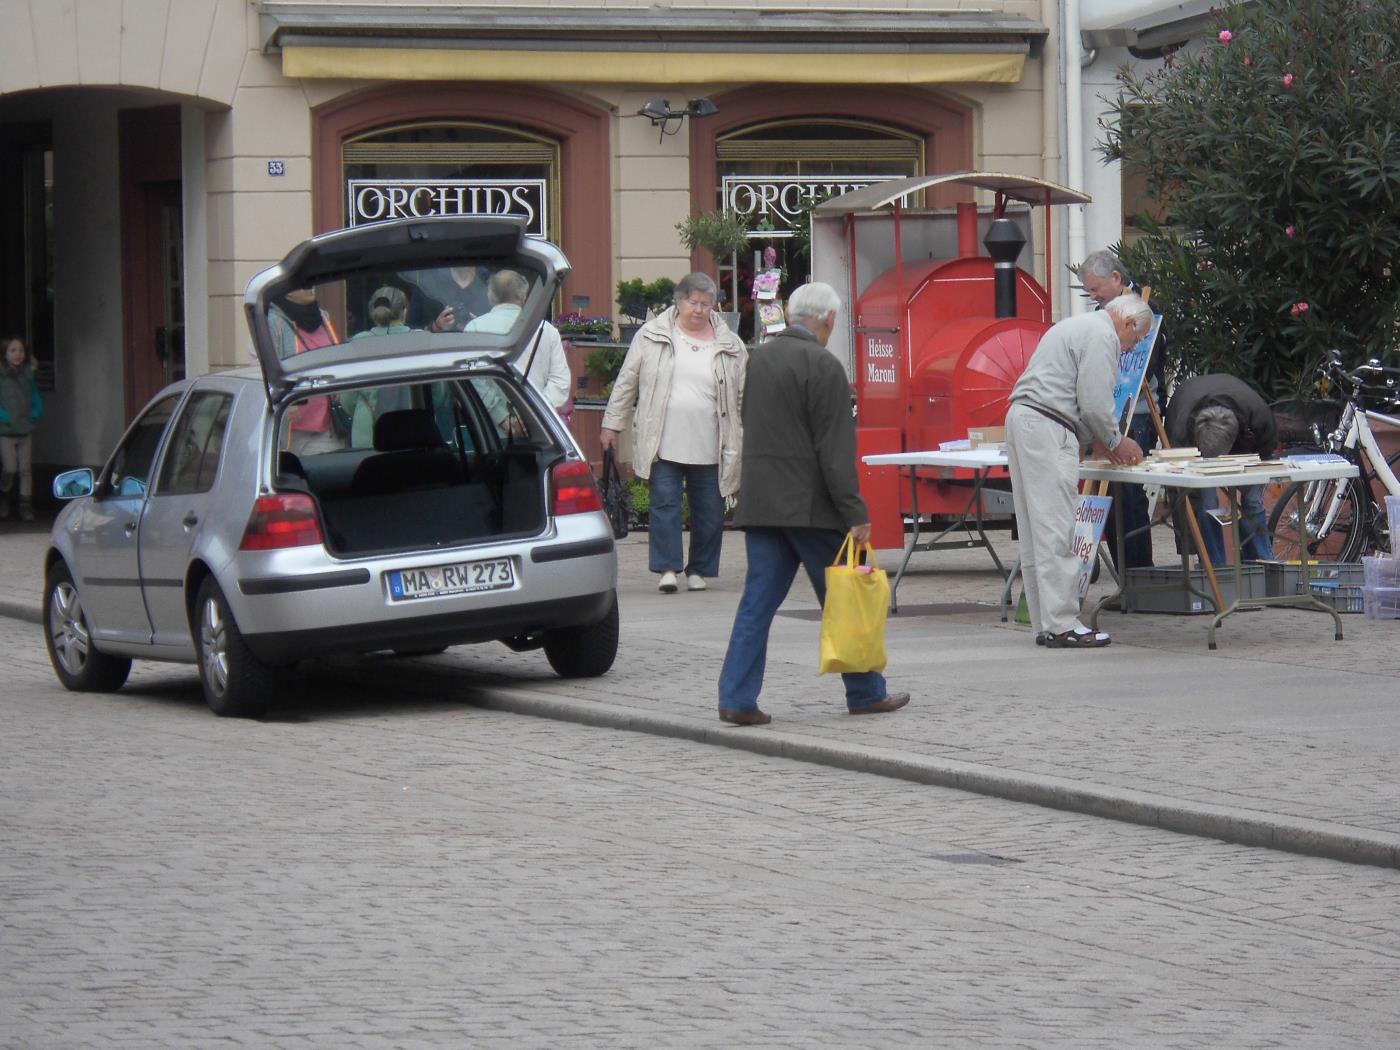 In Speyer no Jehovah's Witnesses, only Christians